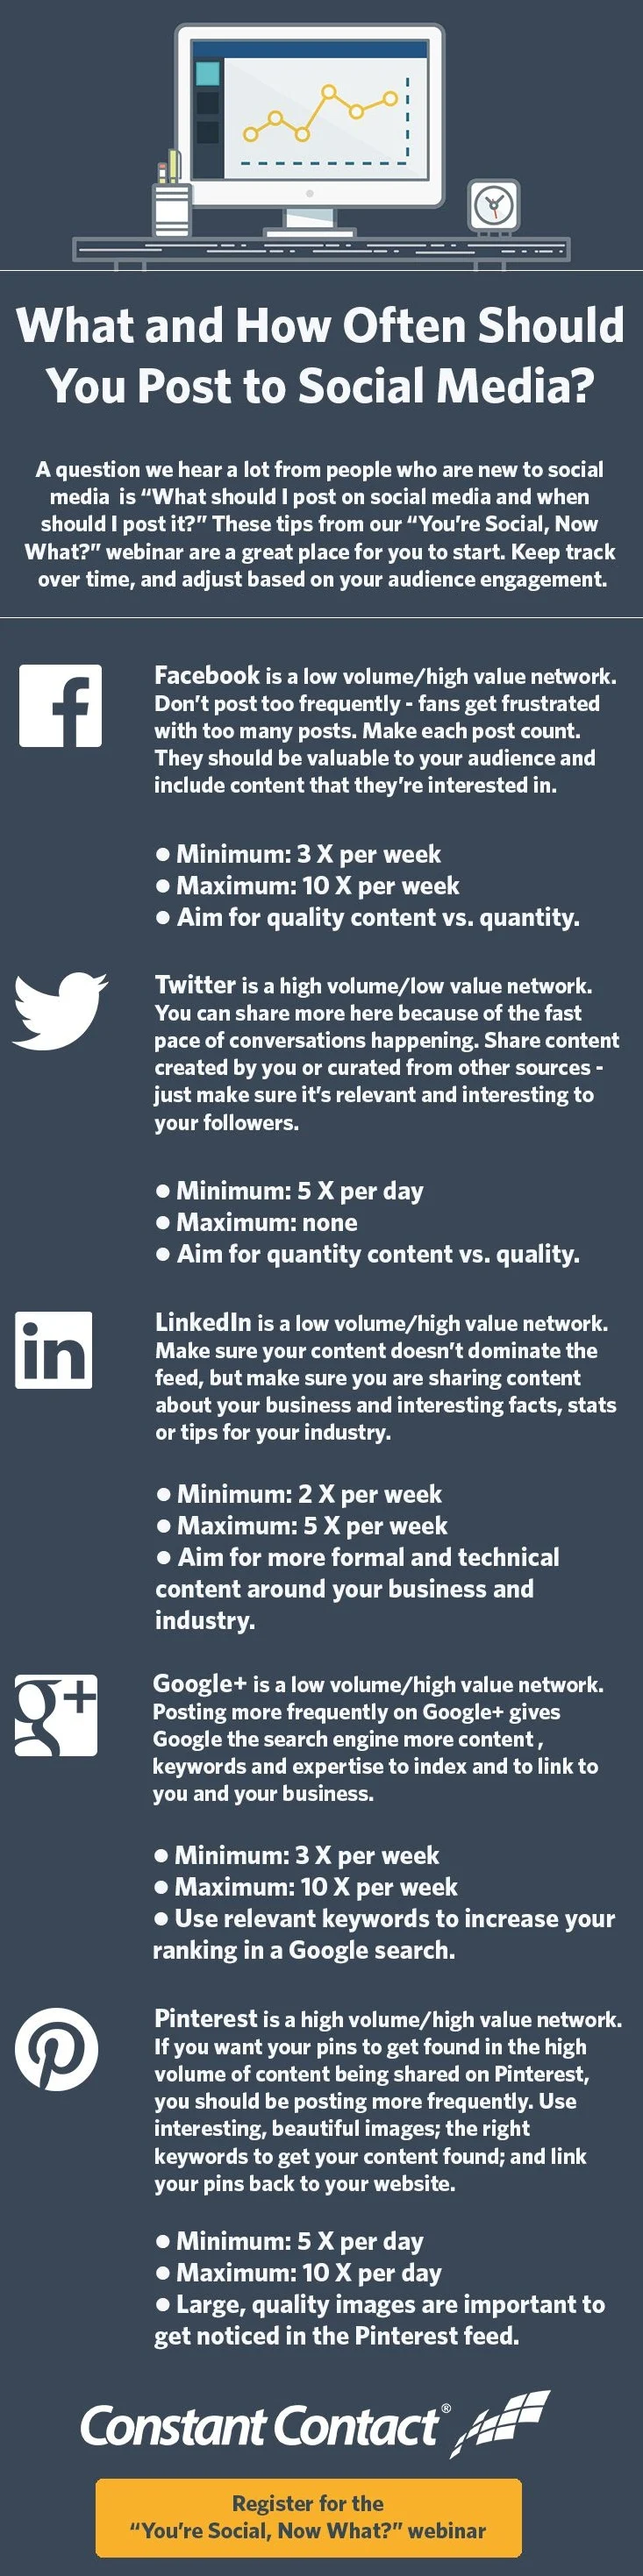 How Often Should You Post to Facebook, Twitter, Pinterest, Google+ — Social Media #infographic